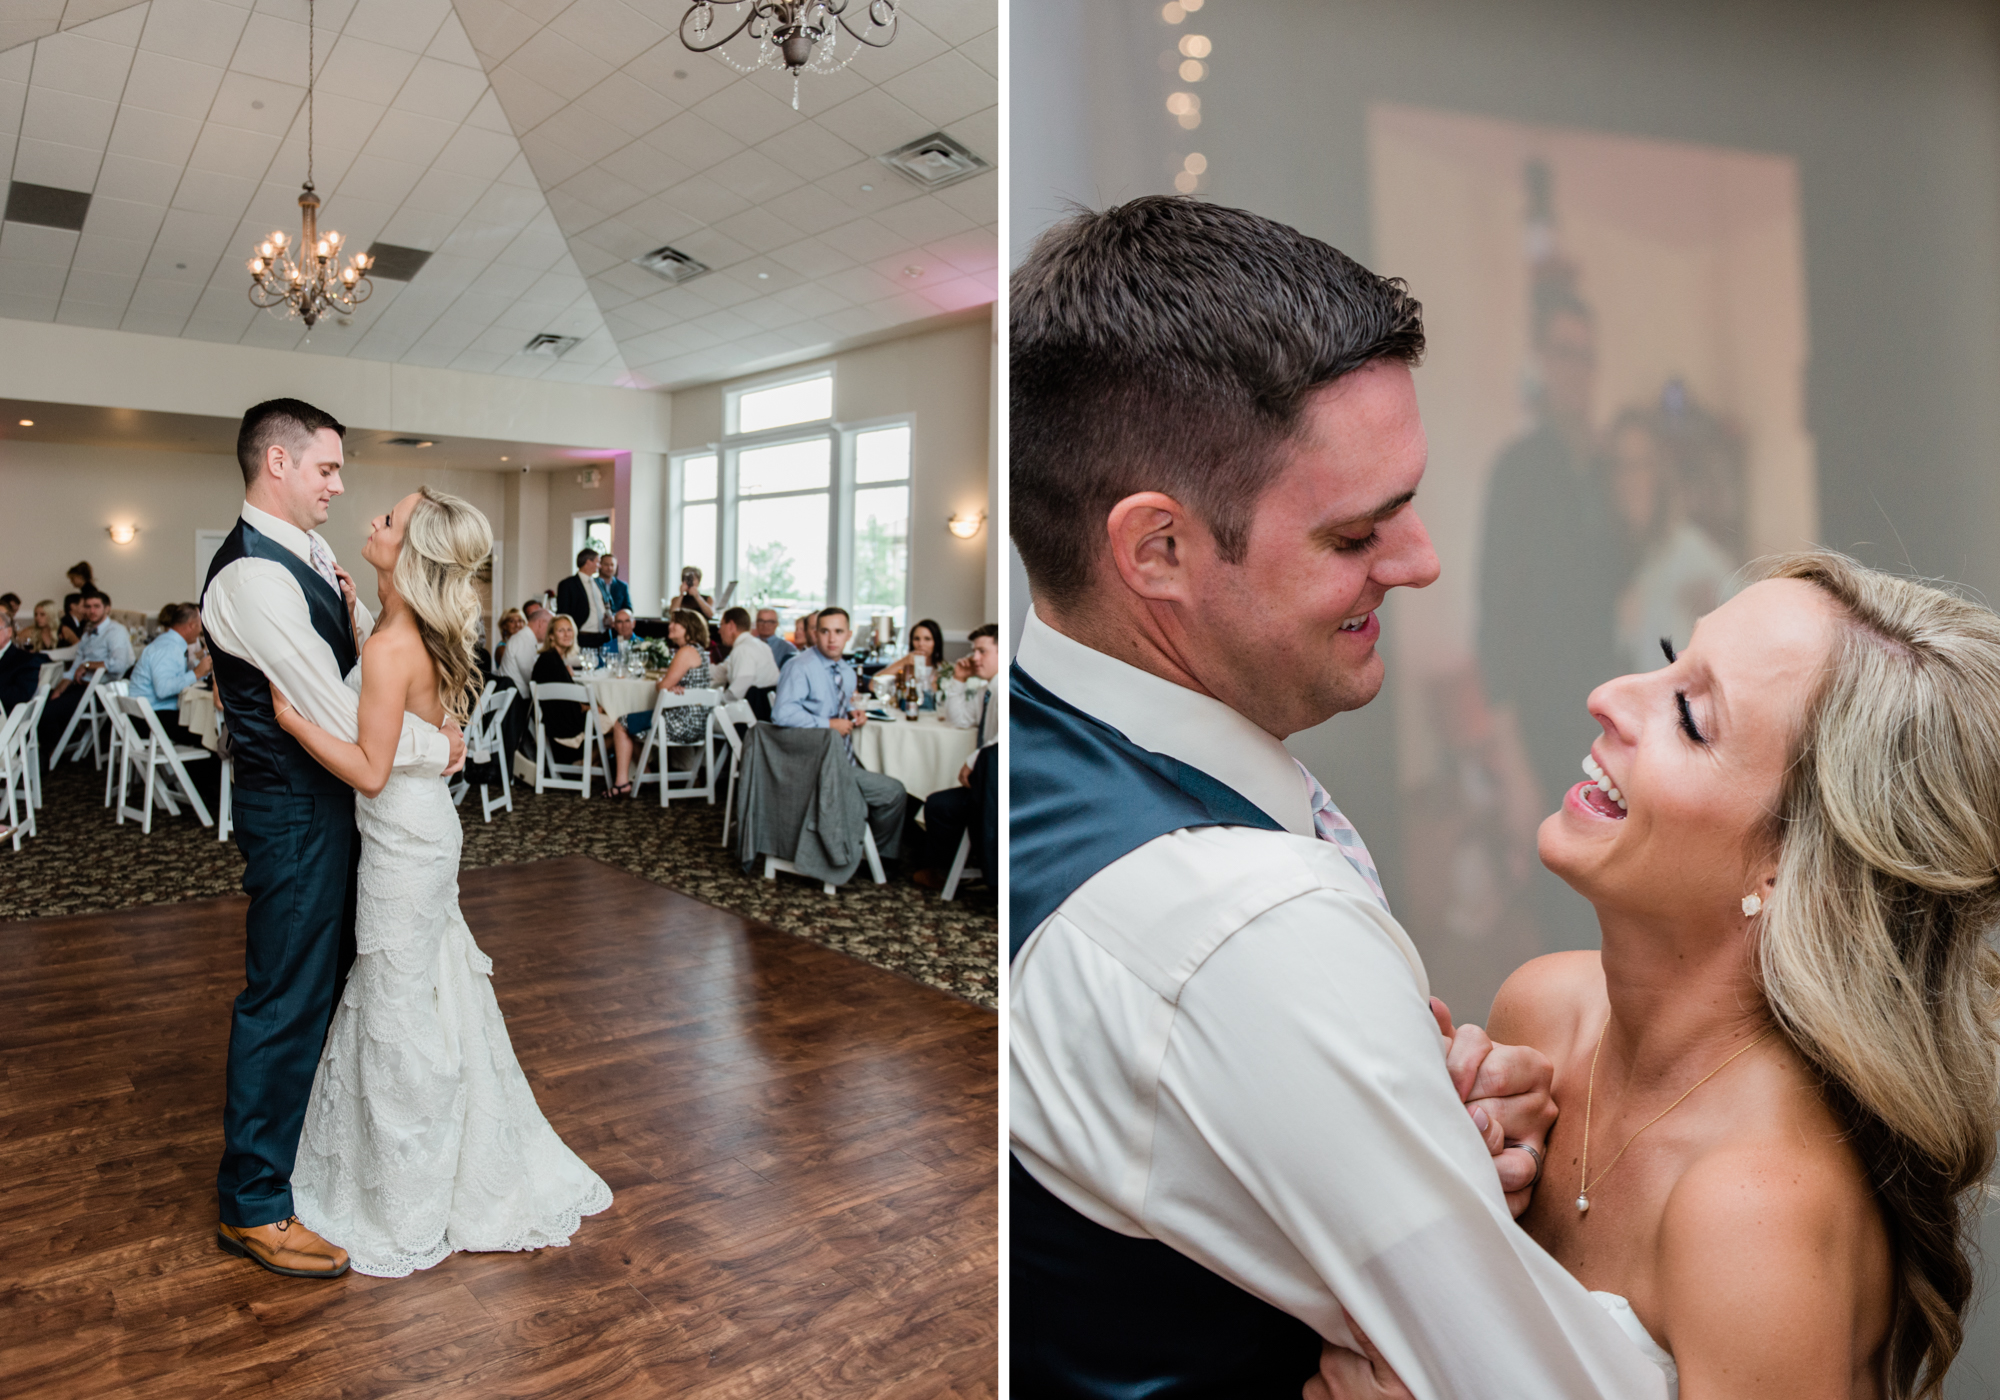 Colorado First Dance Wedding Reception Details Photography at Wedgewood